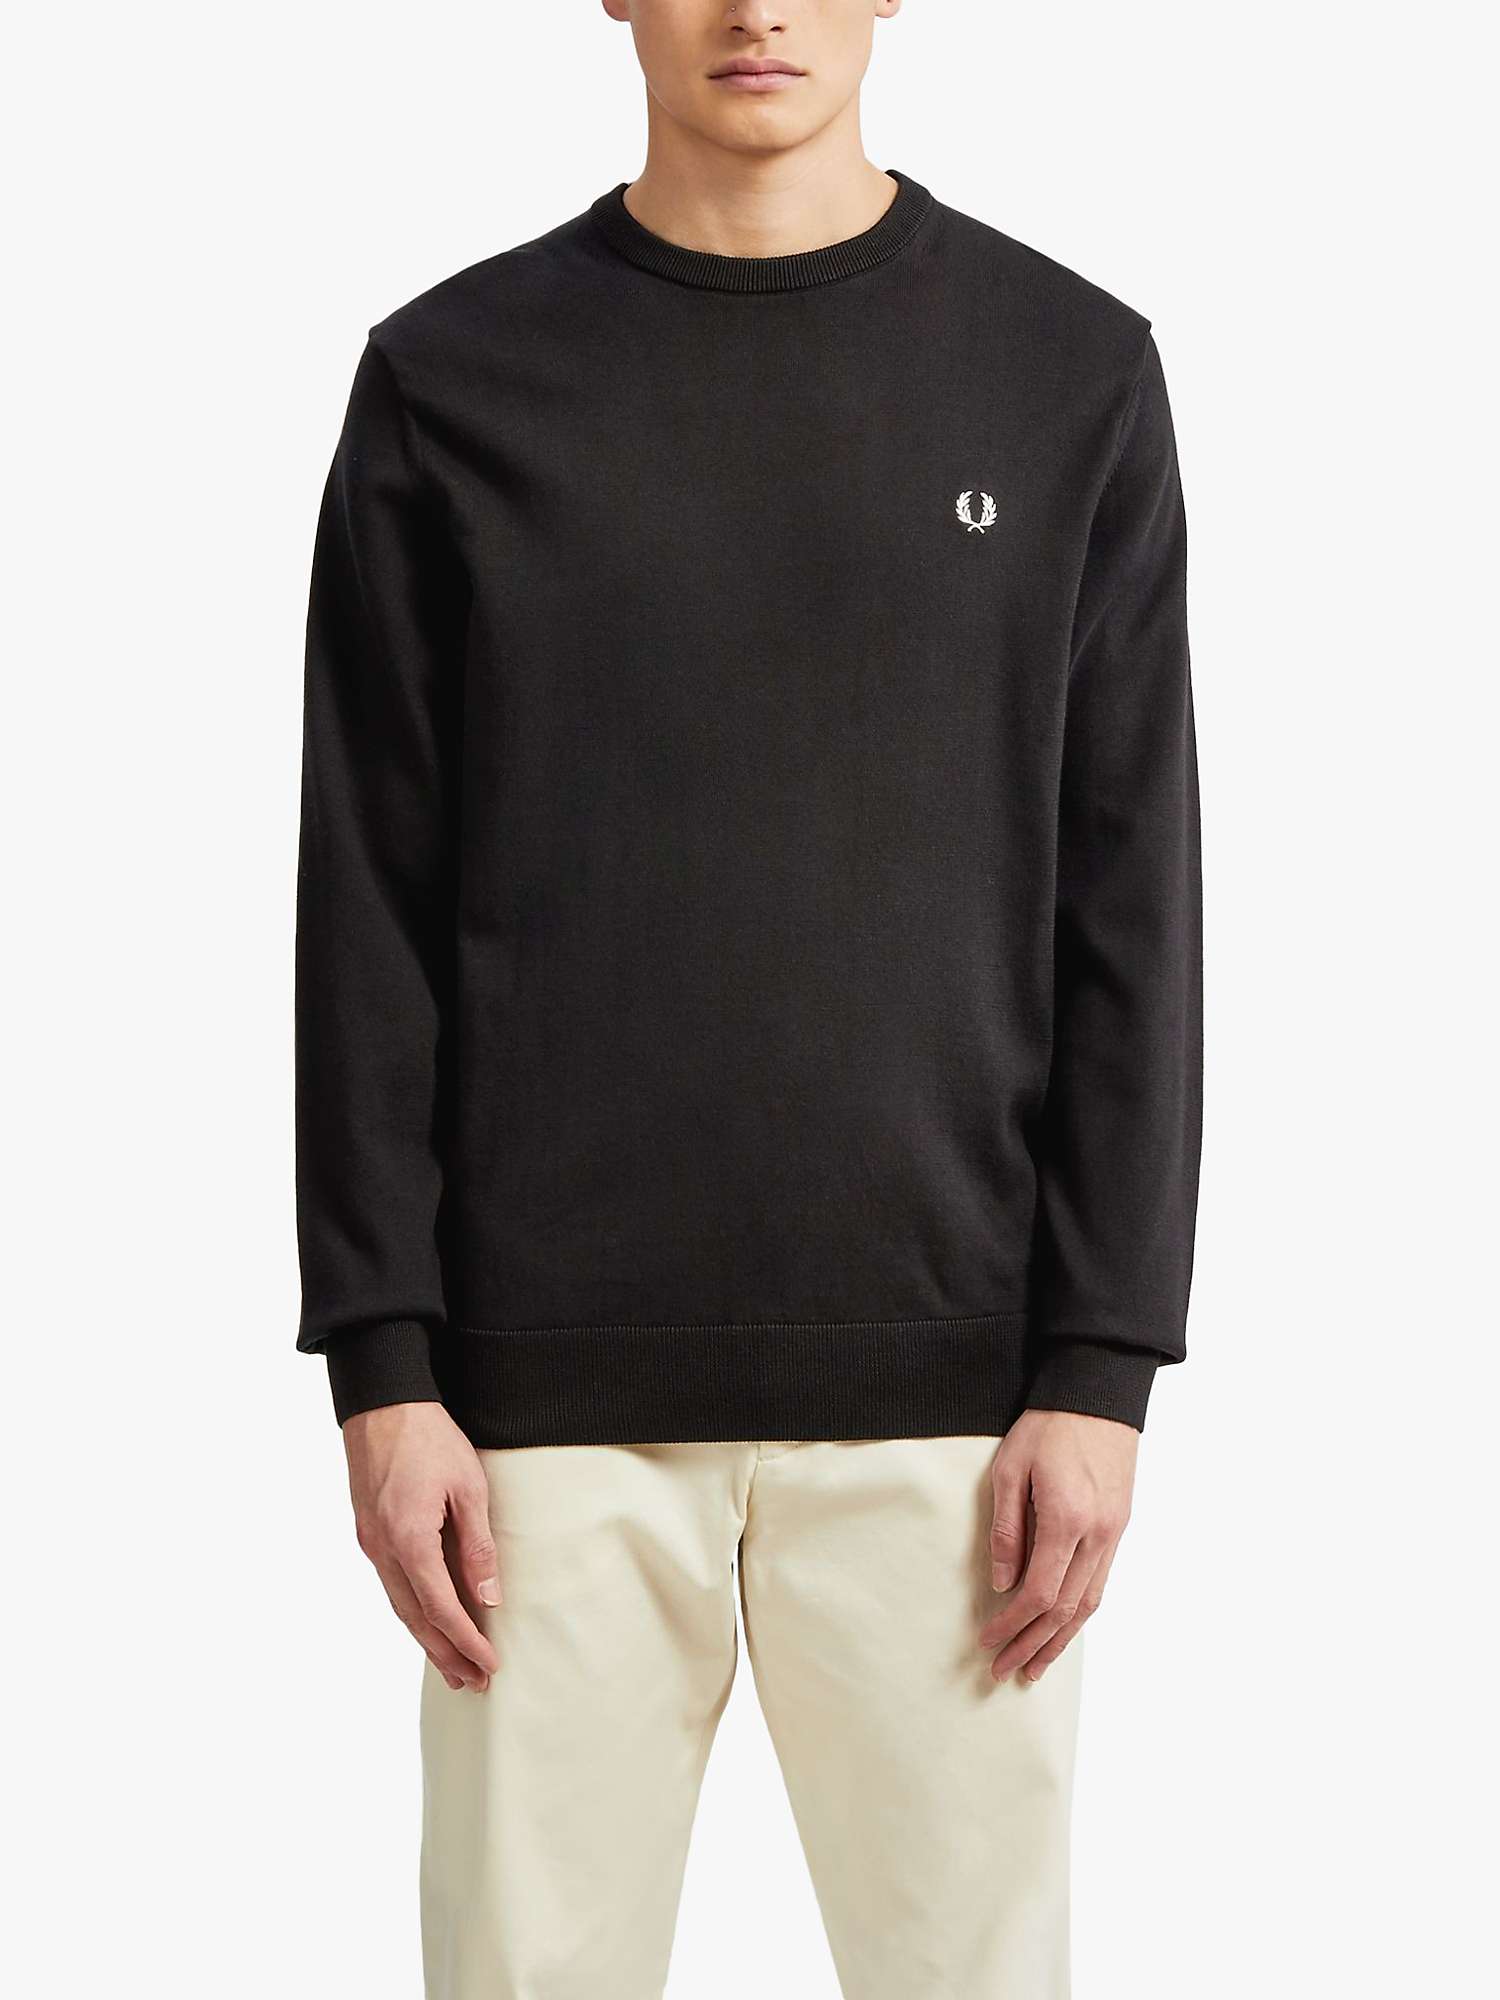 Fred Perry Classic Crew Neck Knit Jumper, Black at John Lewis  Partners